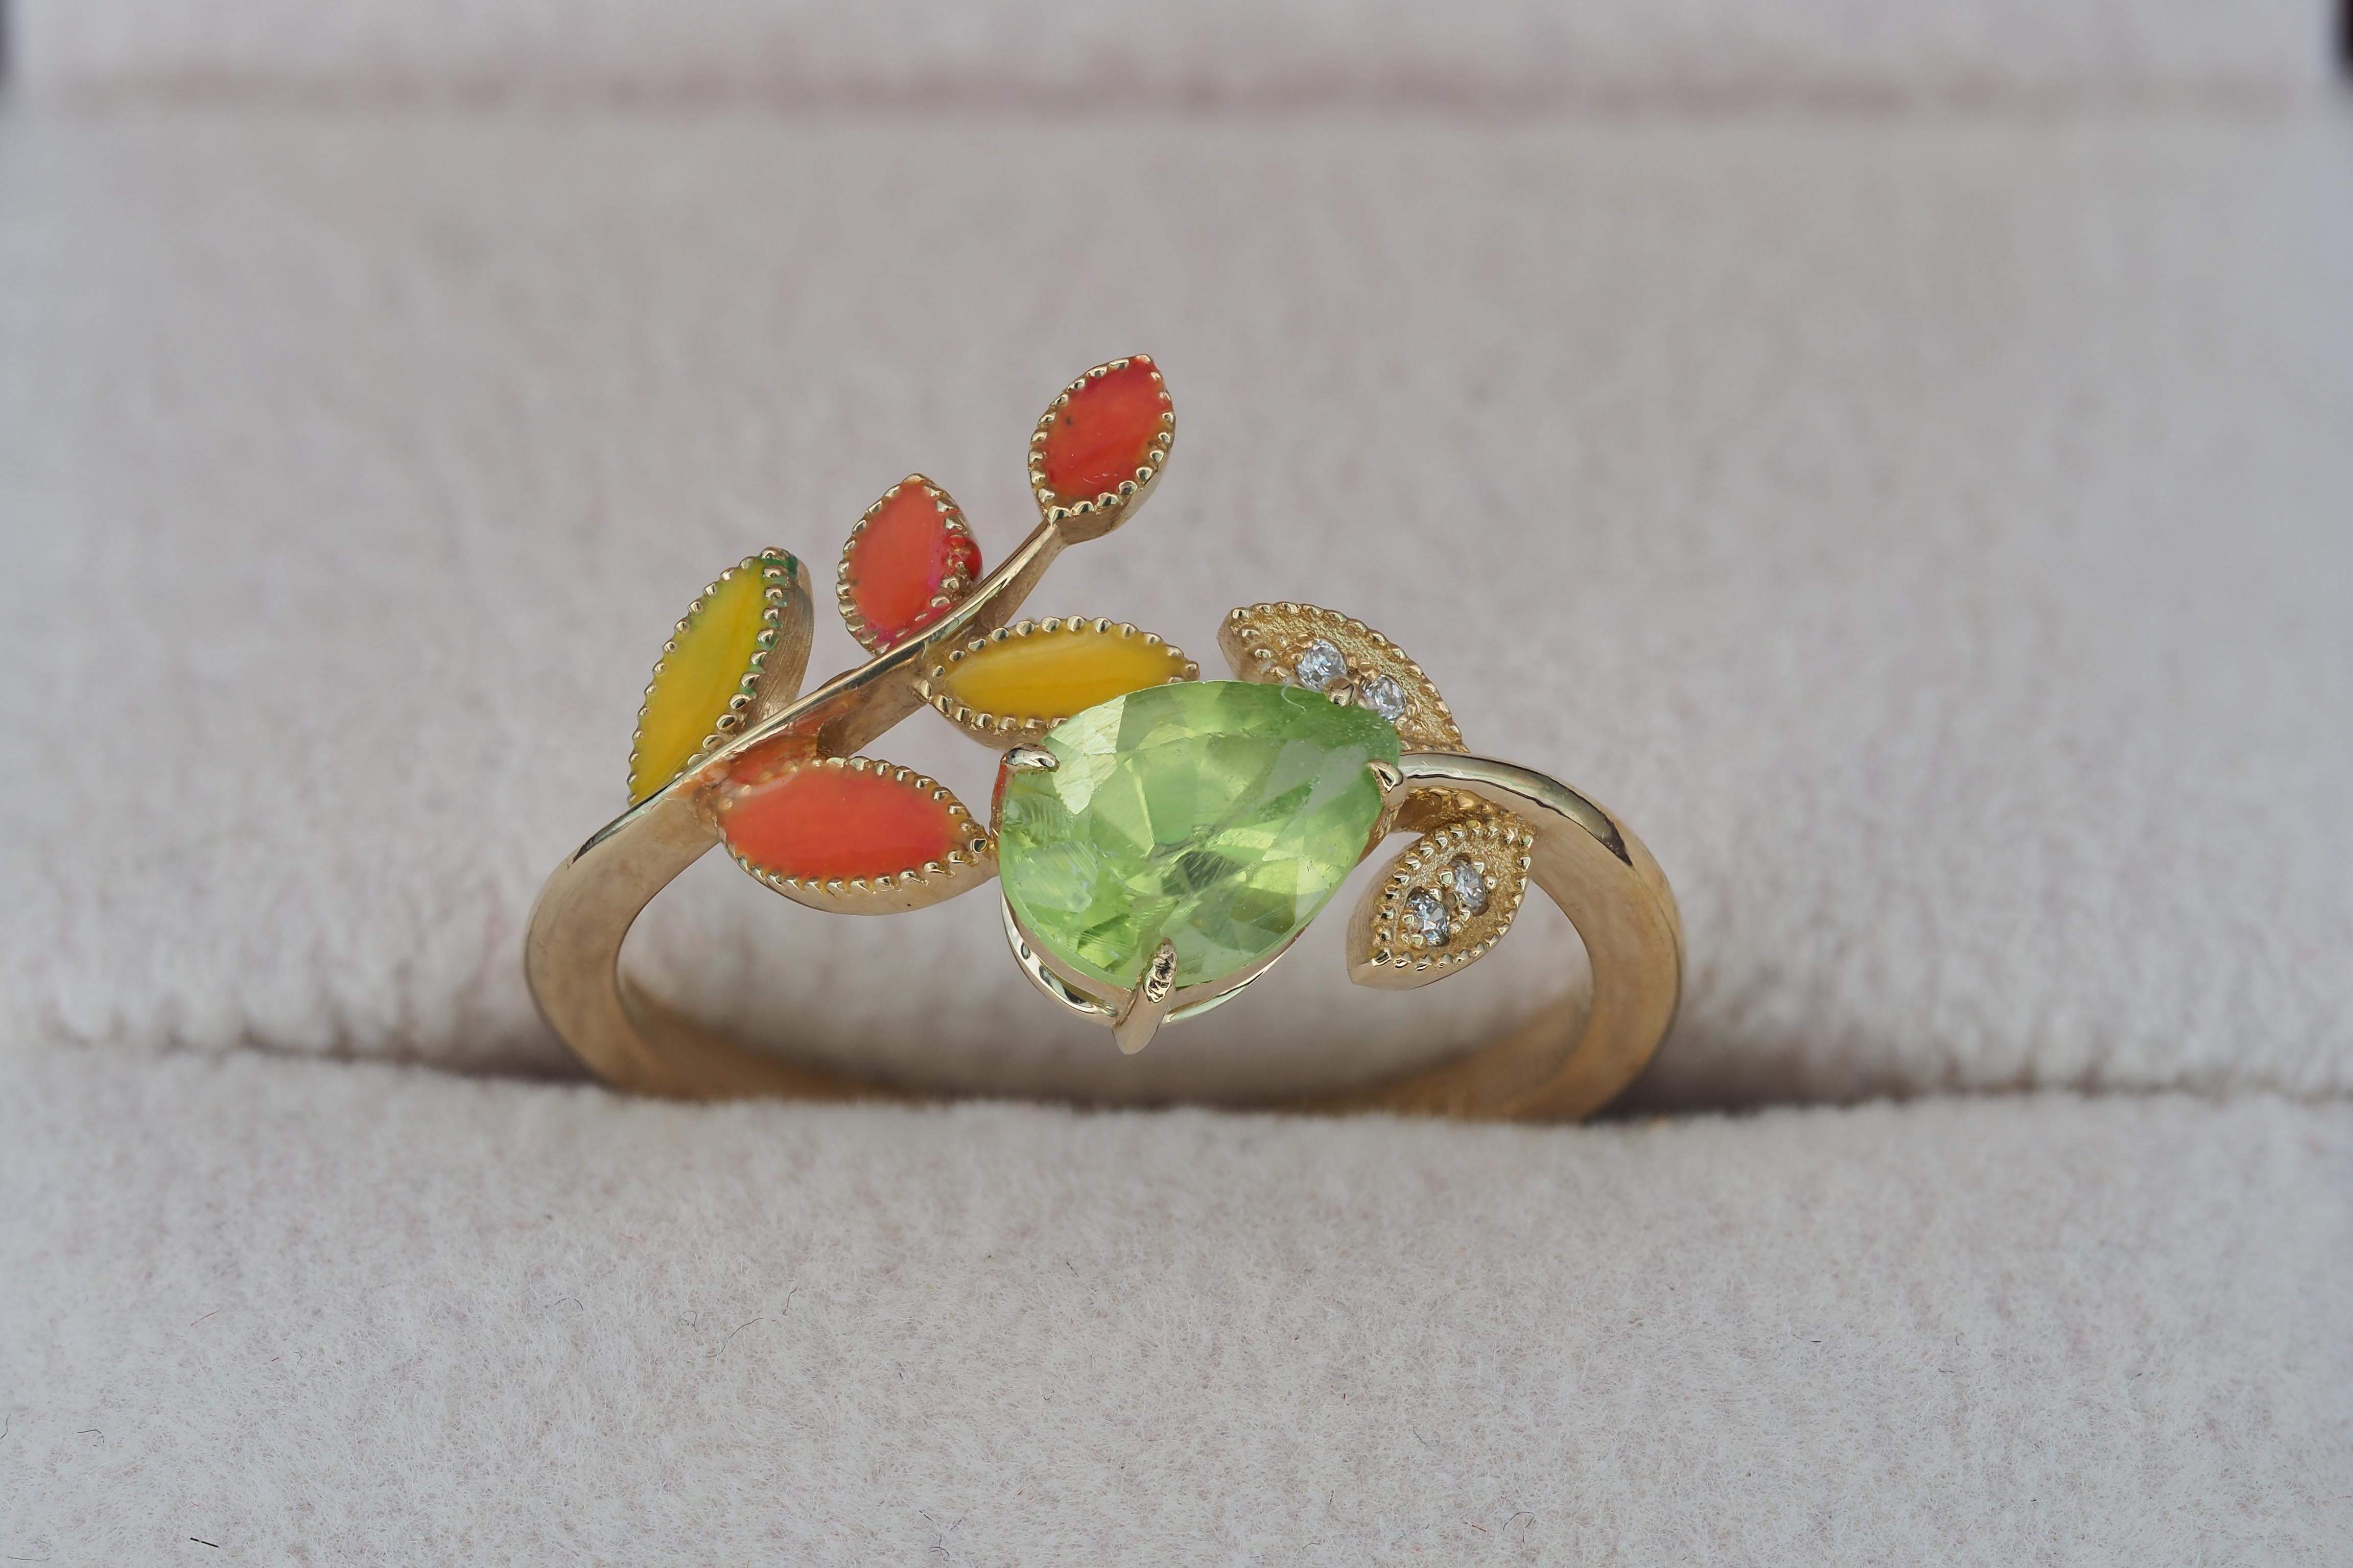 For Sale:  14k Gold Ring with Enamel Autumn Color Leaves with Peridot, Diamonds 7